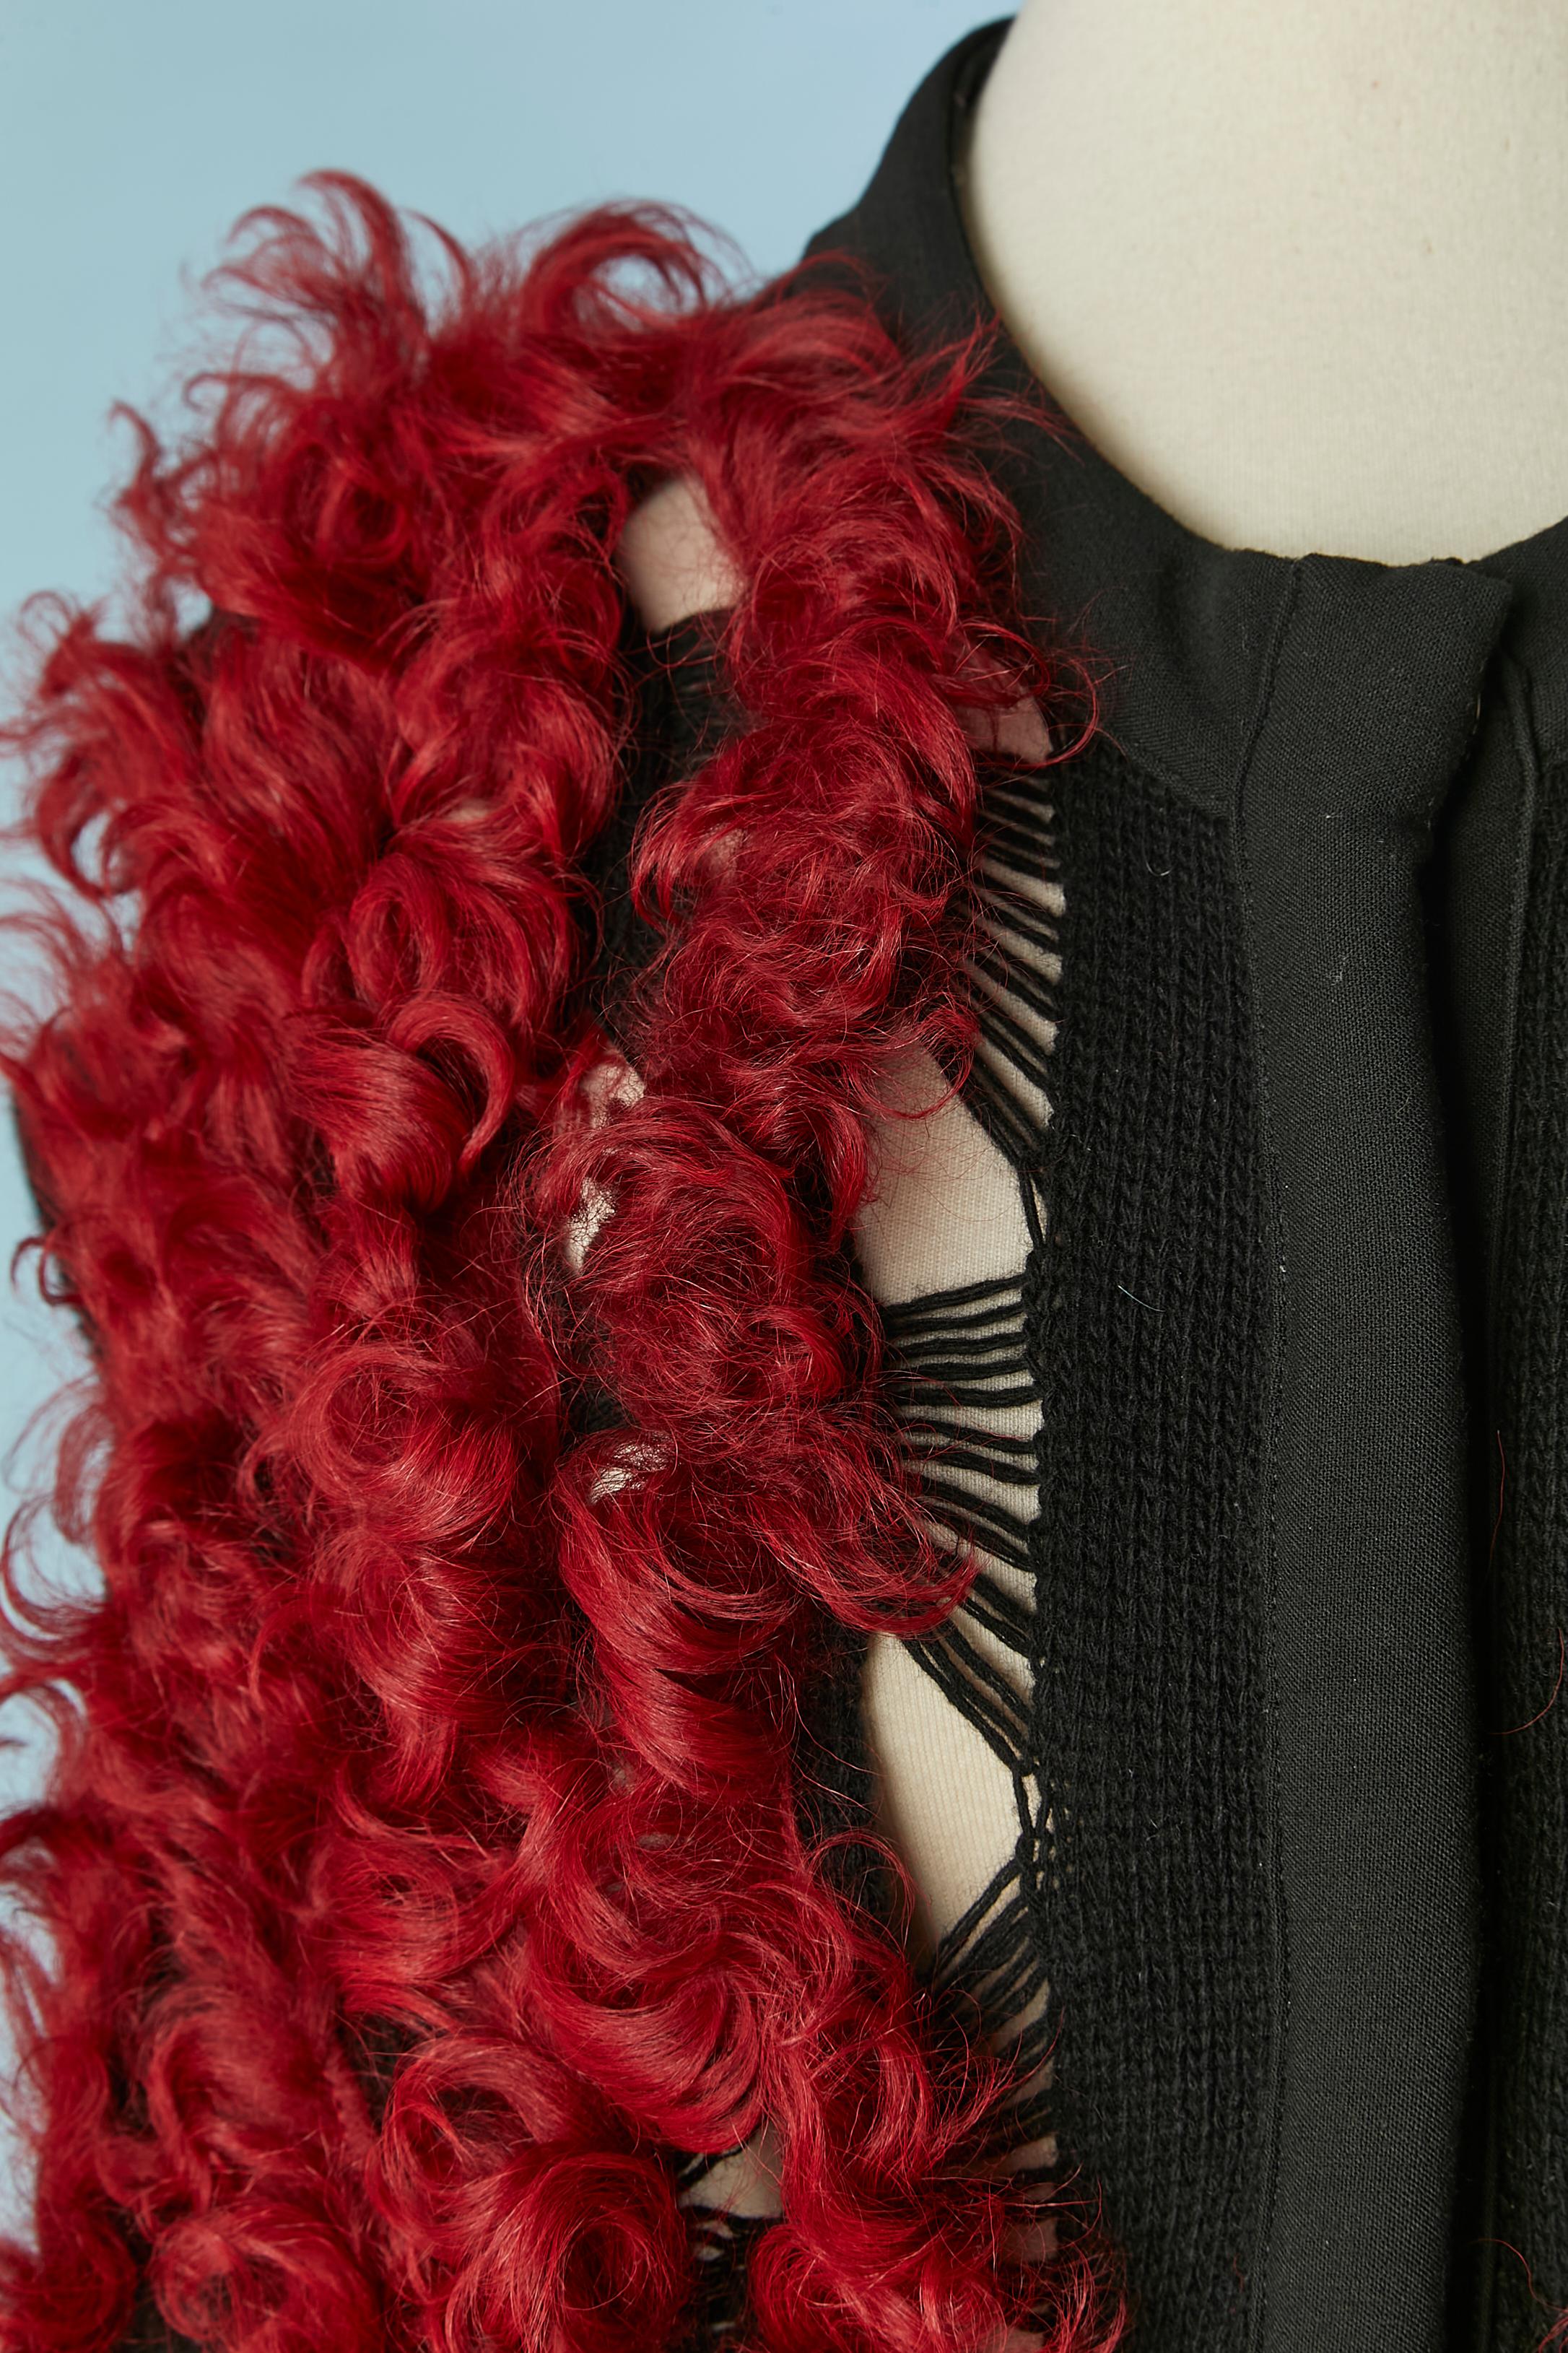 Black knit sleeveless vest with red curly furs appliqué. No fabric tag composition but the knit is probably wool and furs is lamb. Large snap closure in the middle front. 
Limited Edition
SIZE M 